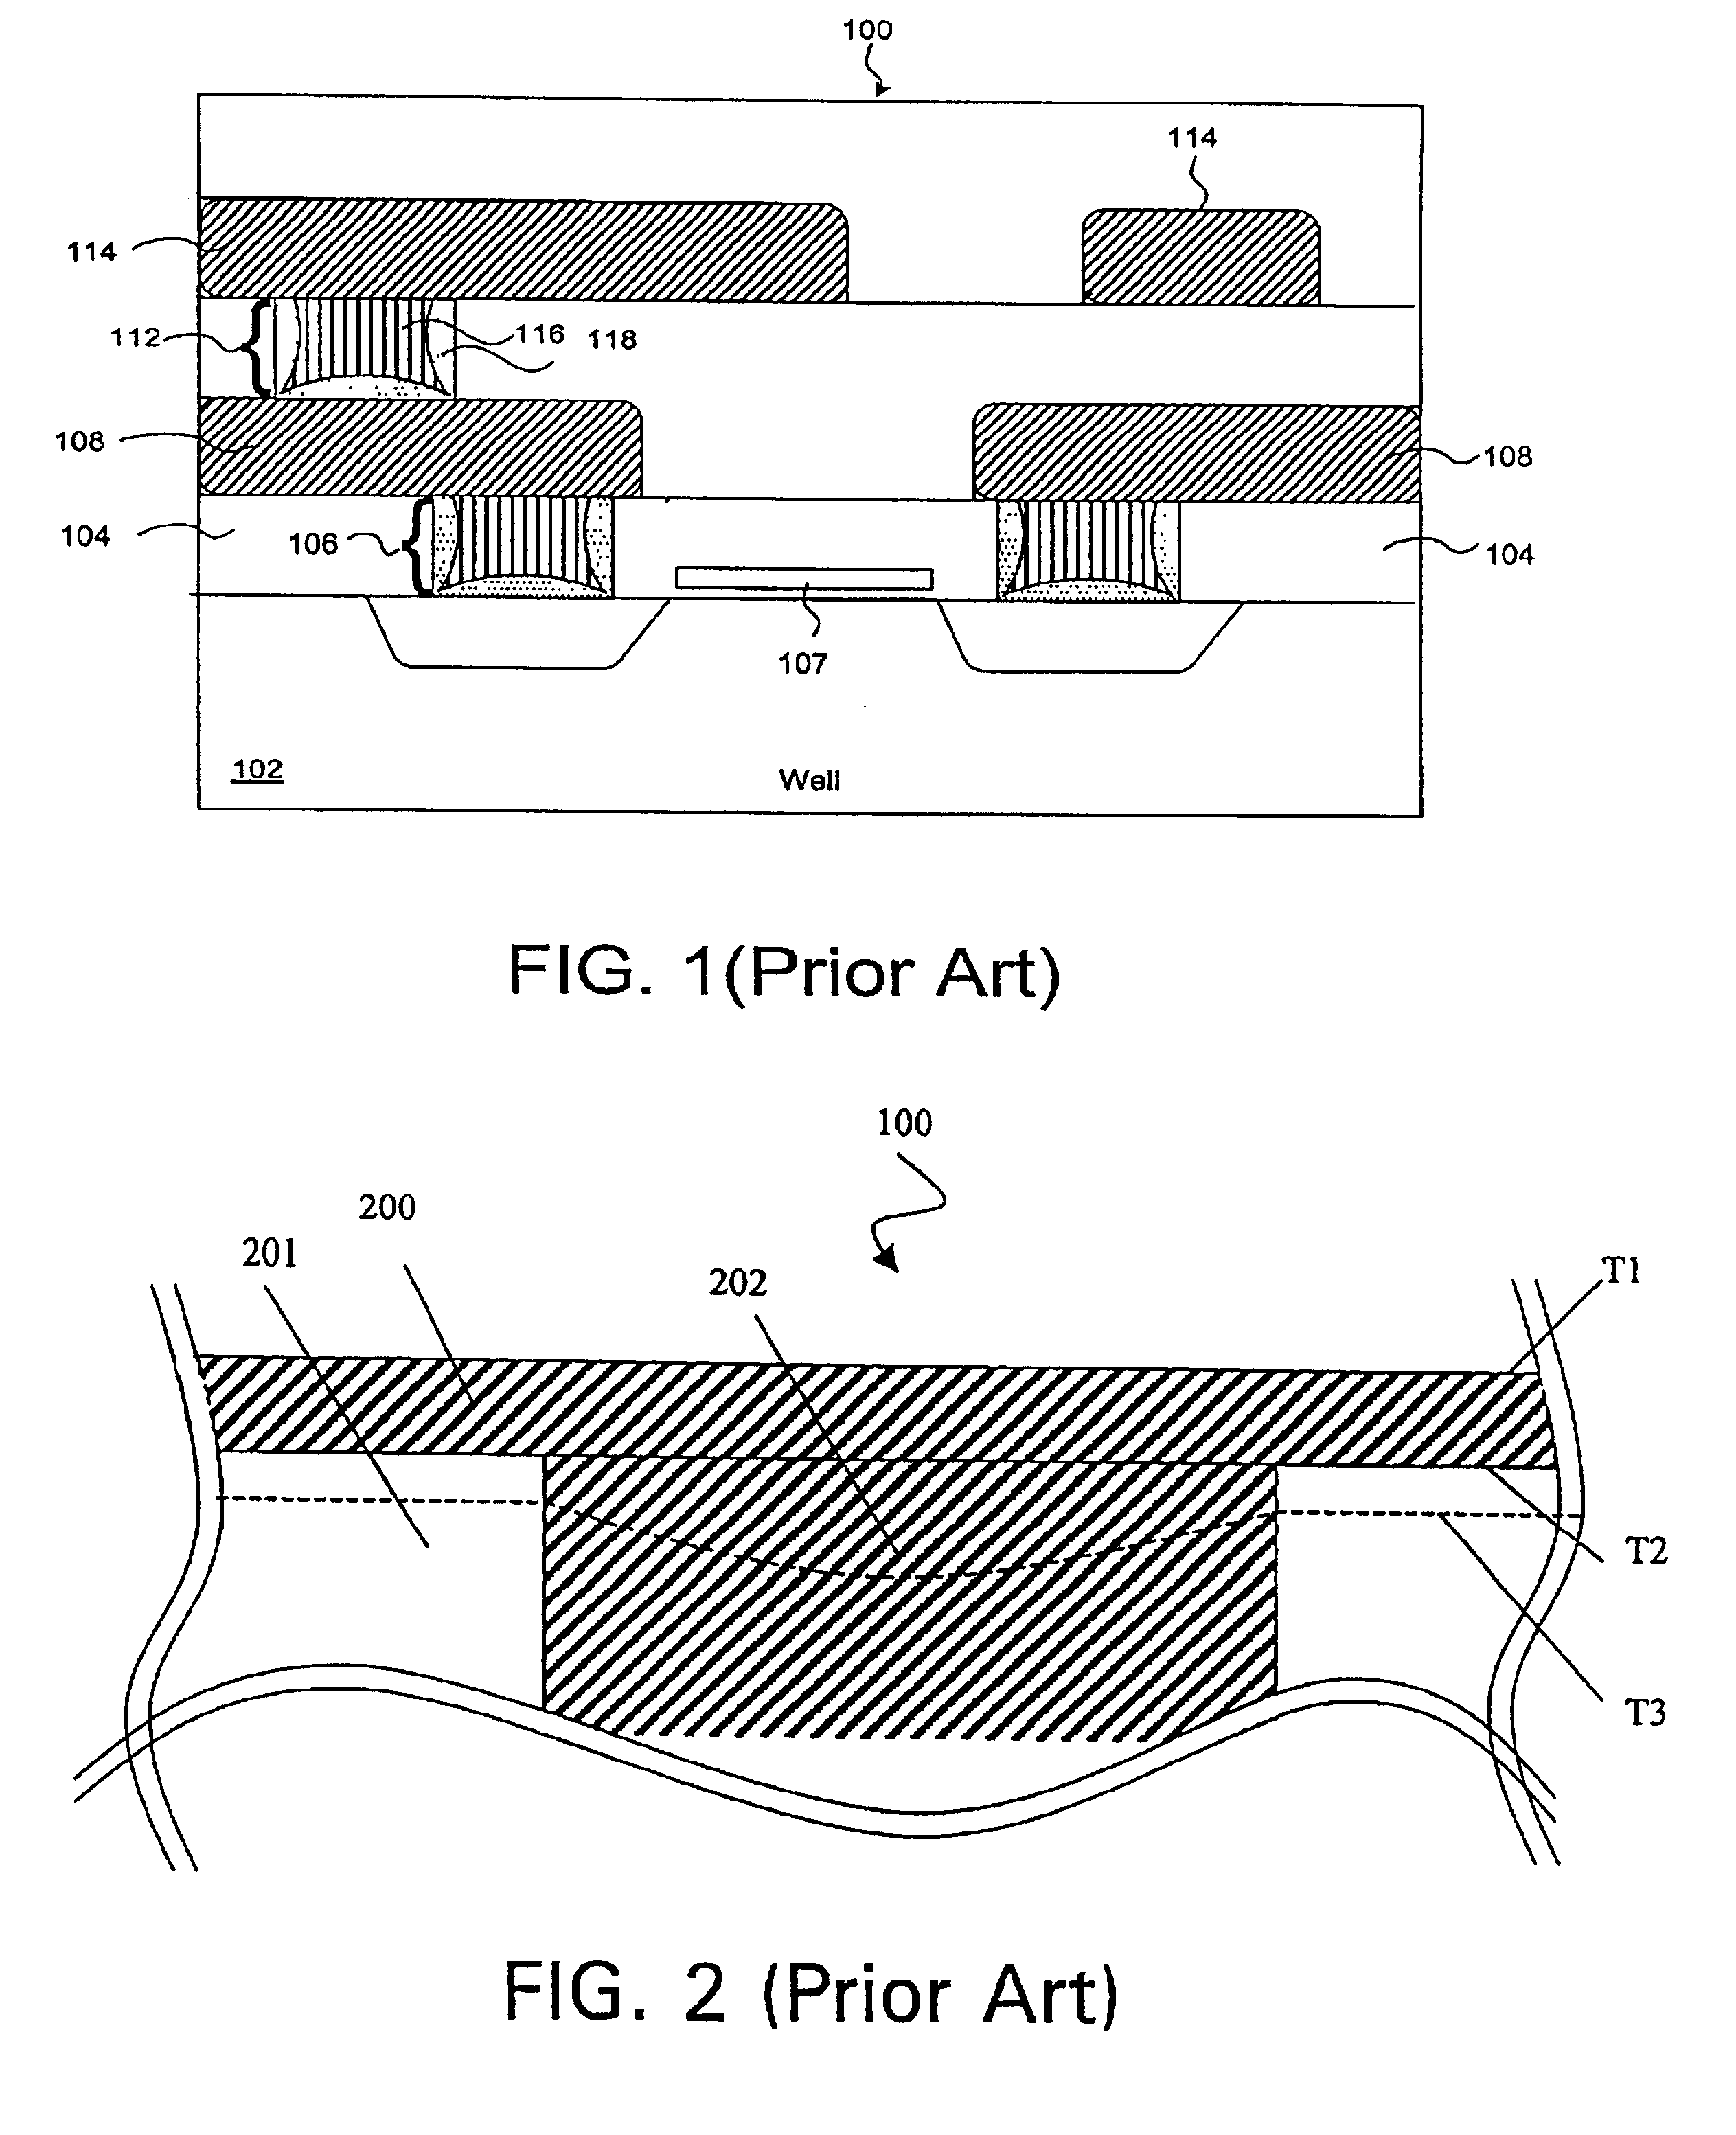 Multizone carrier with process monitoring system for chemical-mechanical planarization tool